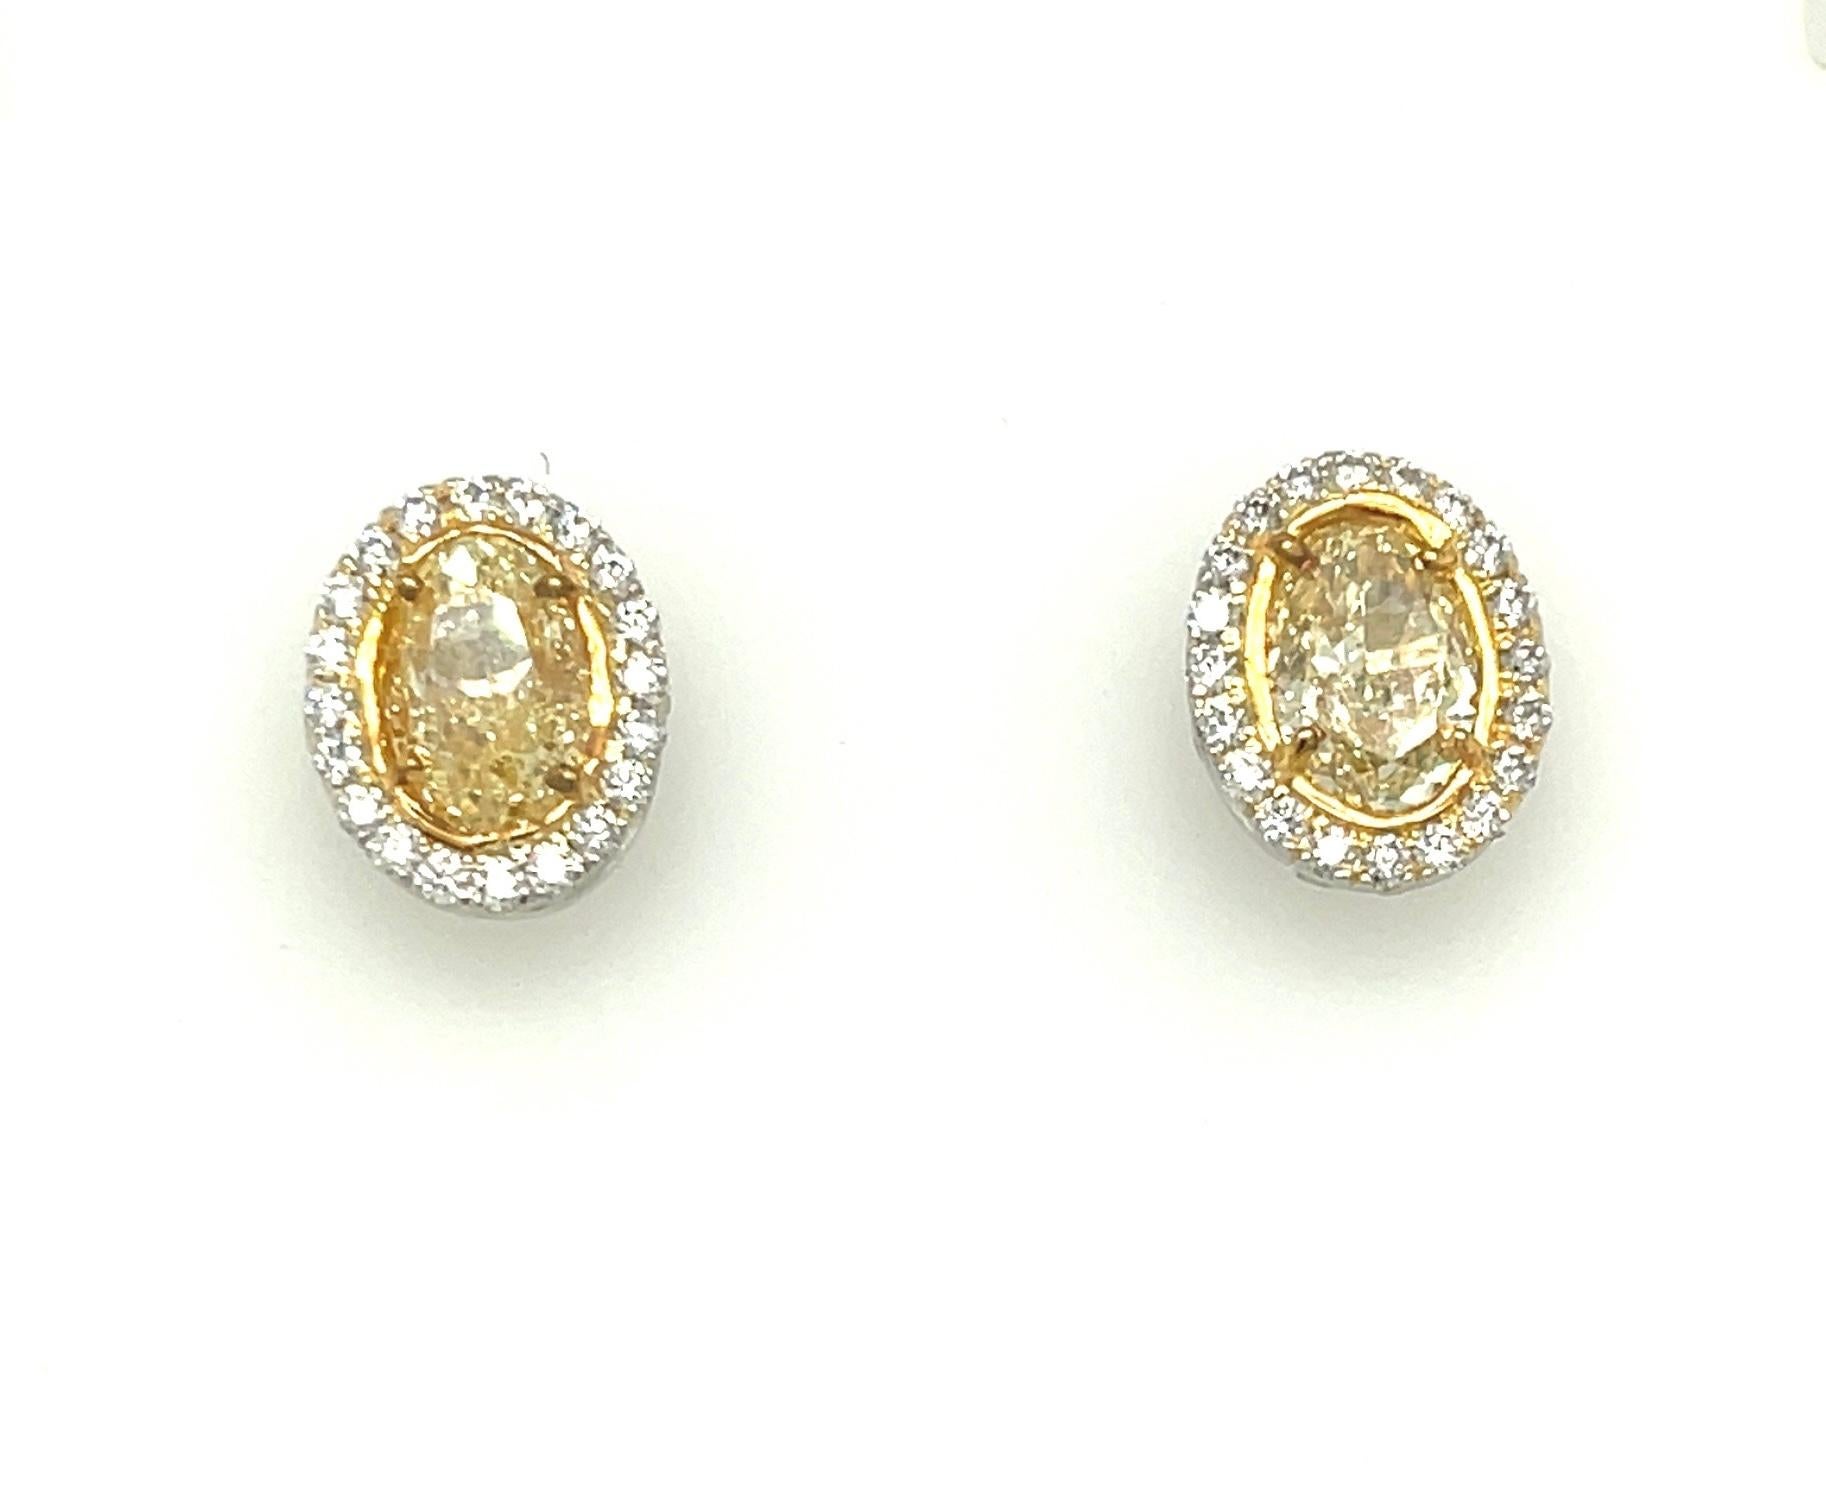 Contemporary Oval Yellow Diamond Earrings 3.13 Carats GIA Certified Platinum / 18 KYG For Sale